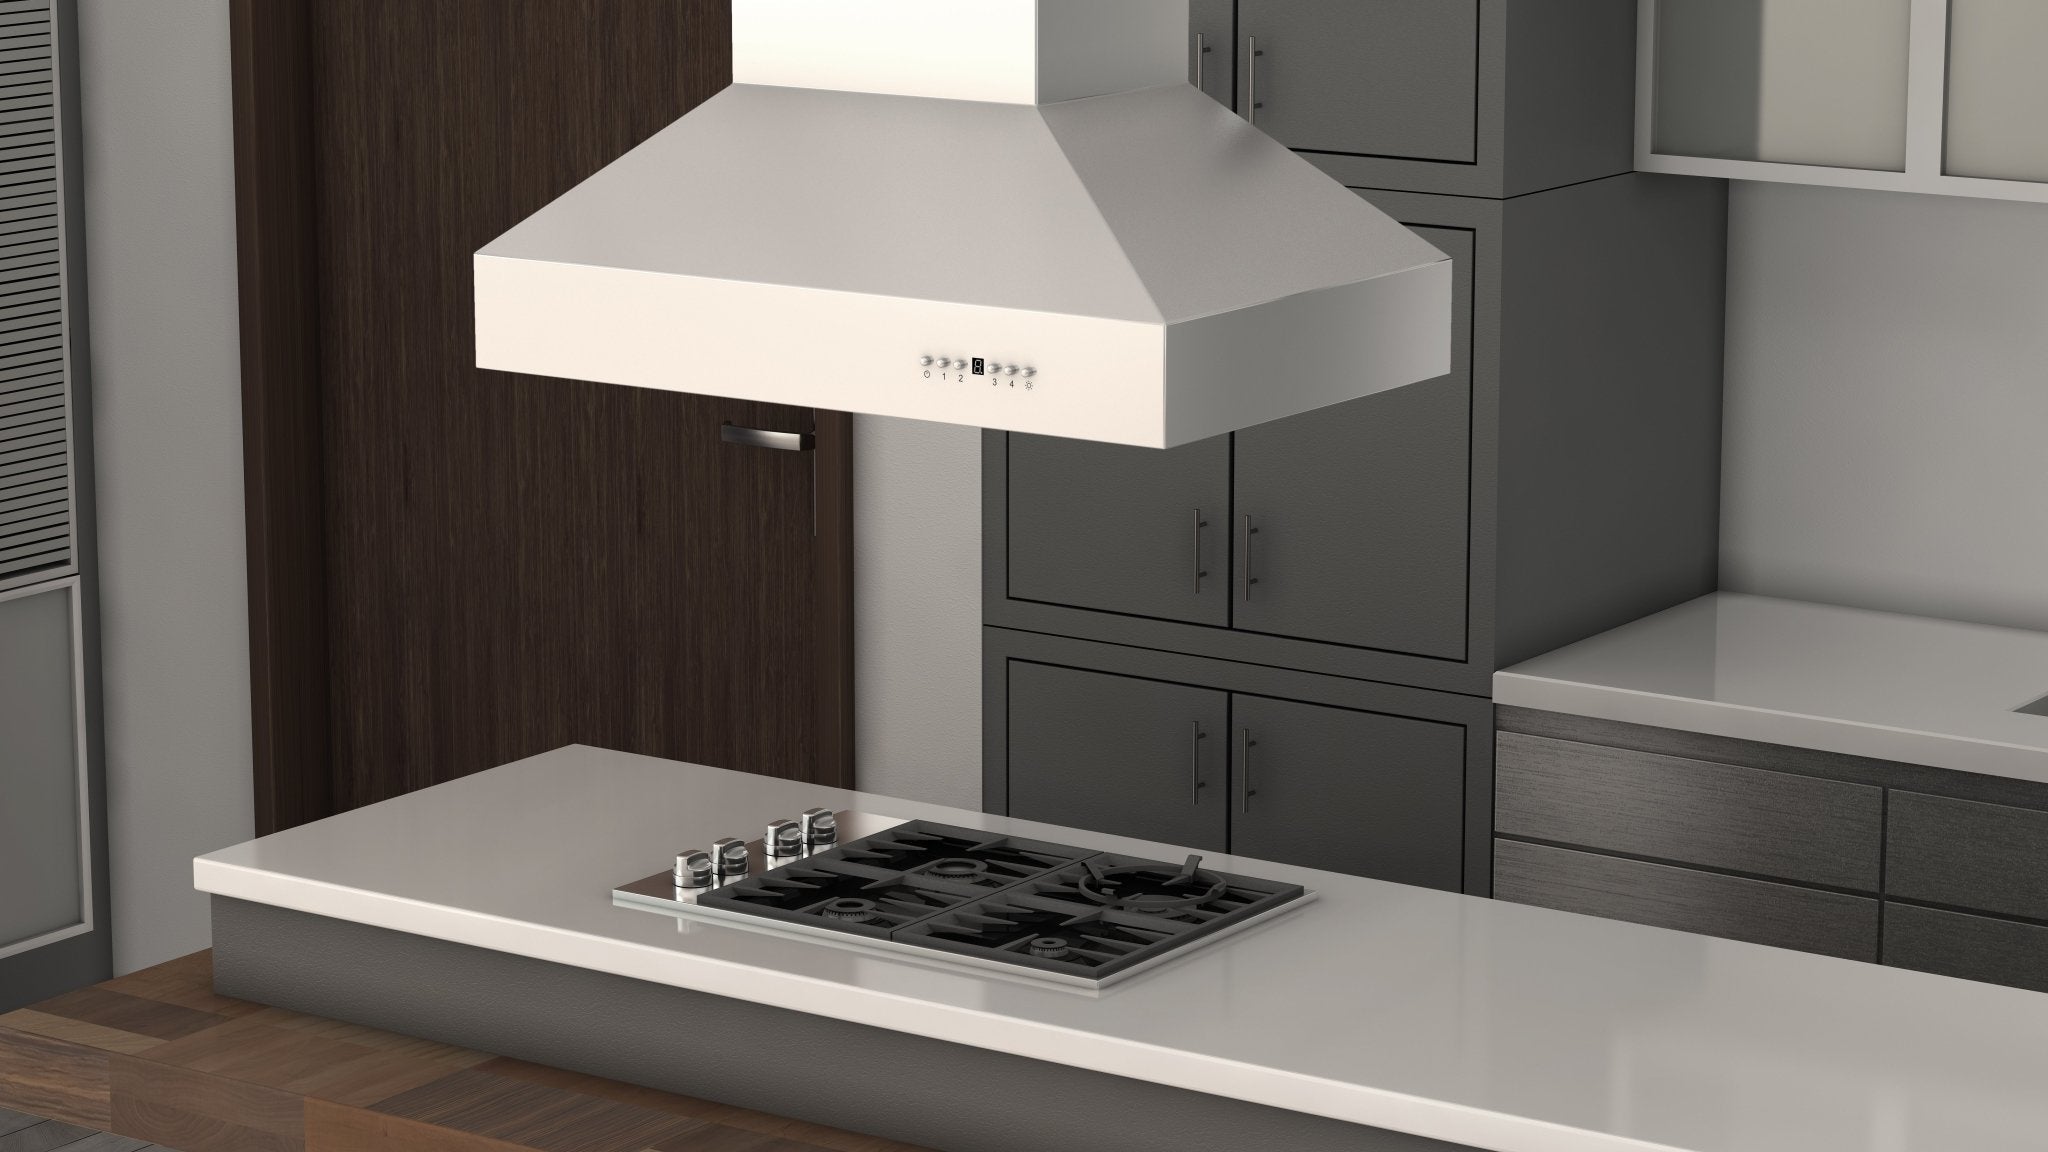 ZLINE Outdoor Approved Island Mount Range Hood in Stainless Steel (697i-304) rendering in a luxury kitchen from above close up.